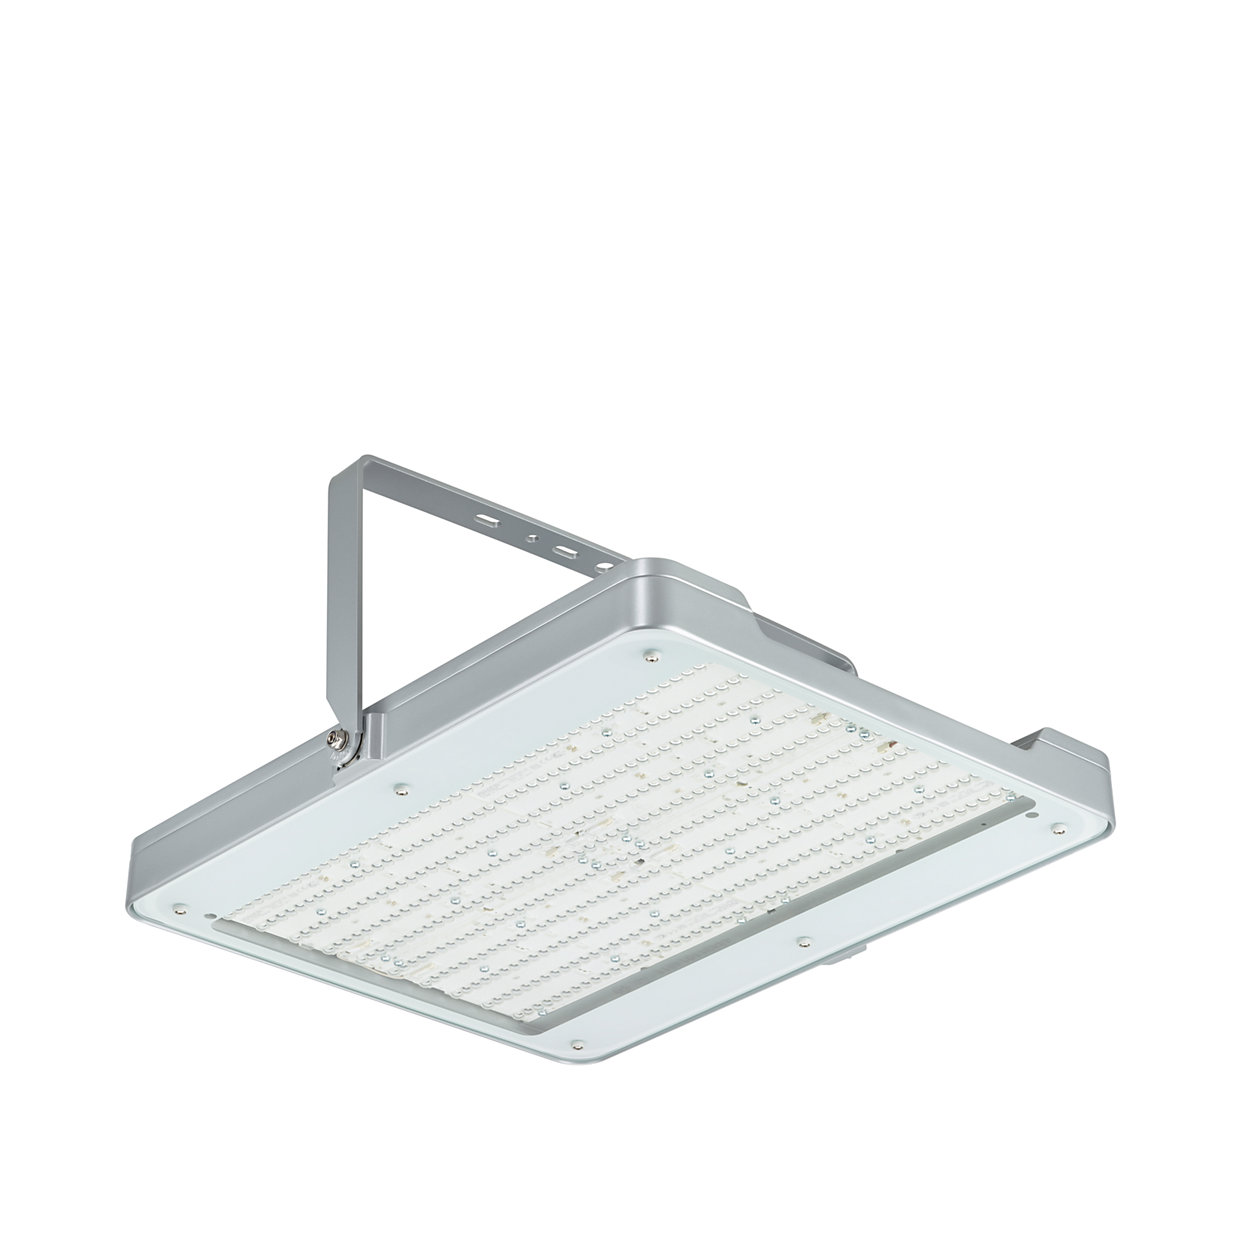 Philips GentleSpace – High efficiency, excellent light quality and connectivity options. Now every highbay application has met its match.